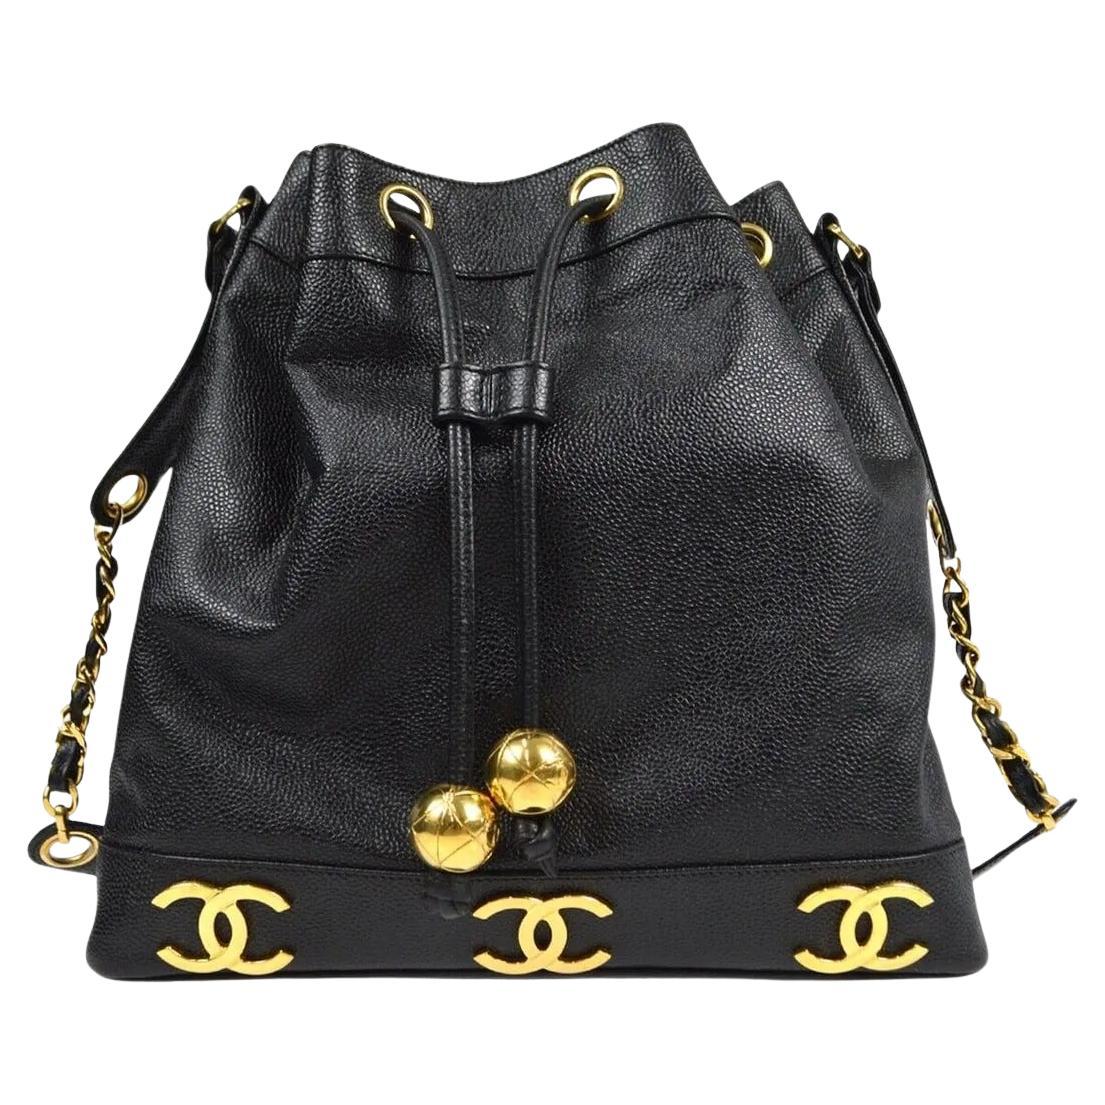 Chanel Six CC Caviar Leather Draw String Pendant Shoulder bag/ Backpack.
Beautiful Caviar leather bag with gold accents. 
The caviar leather is in excellent condition. The drawstring is made from the same leather and extend around the top of the bag